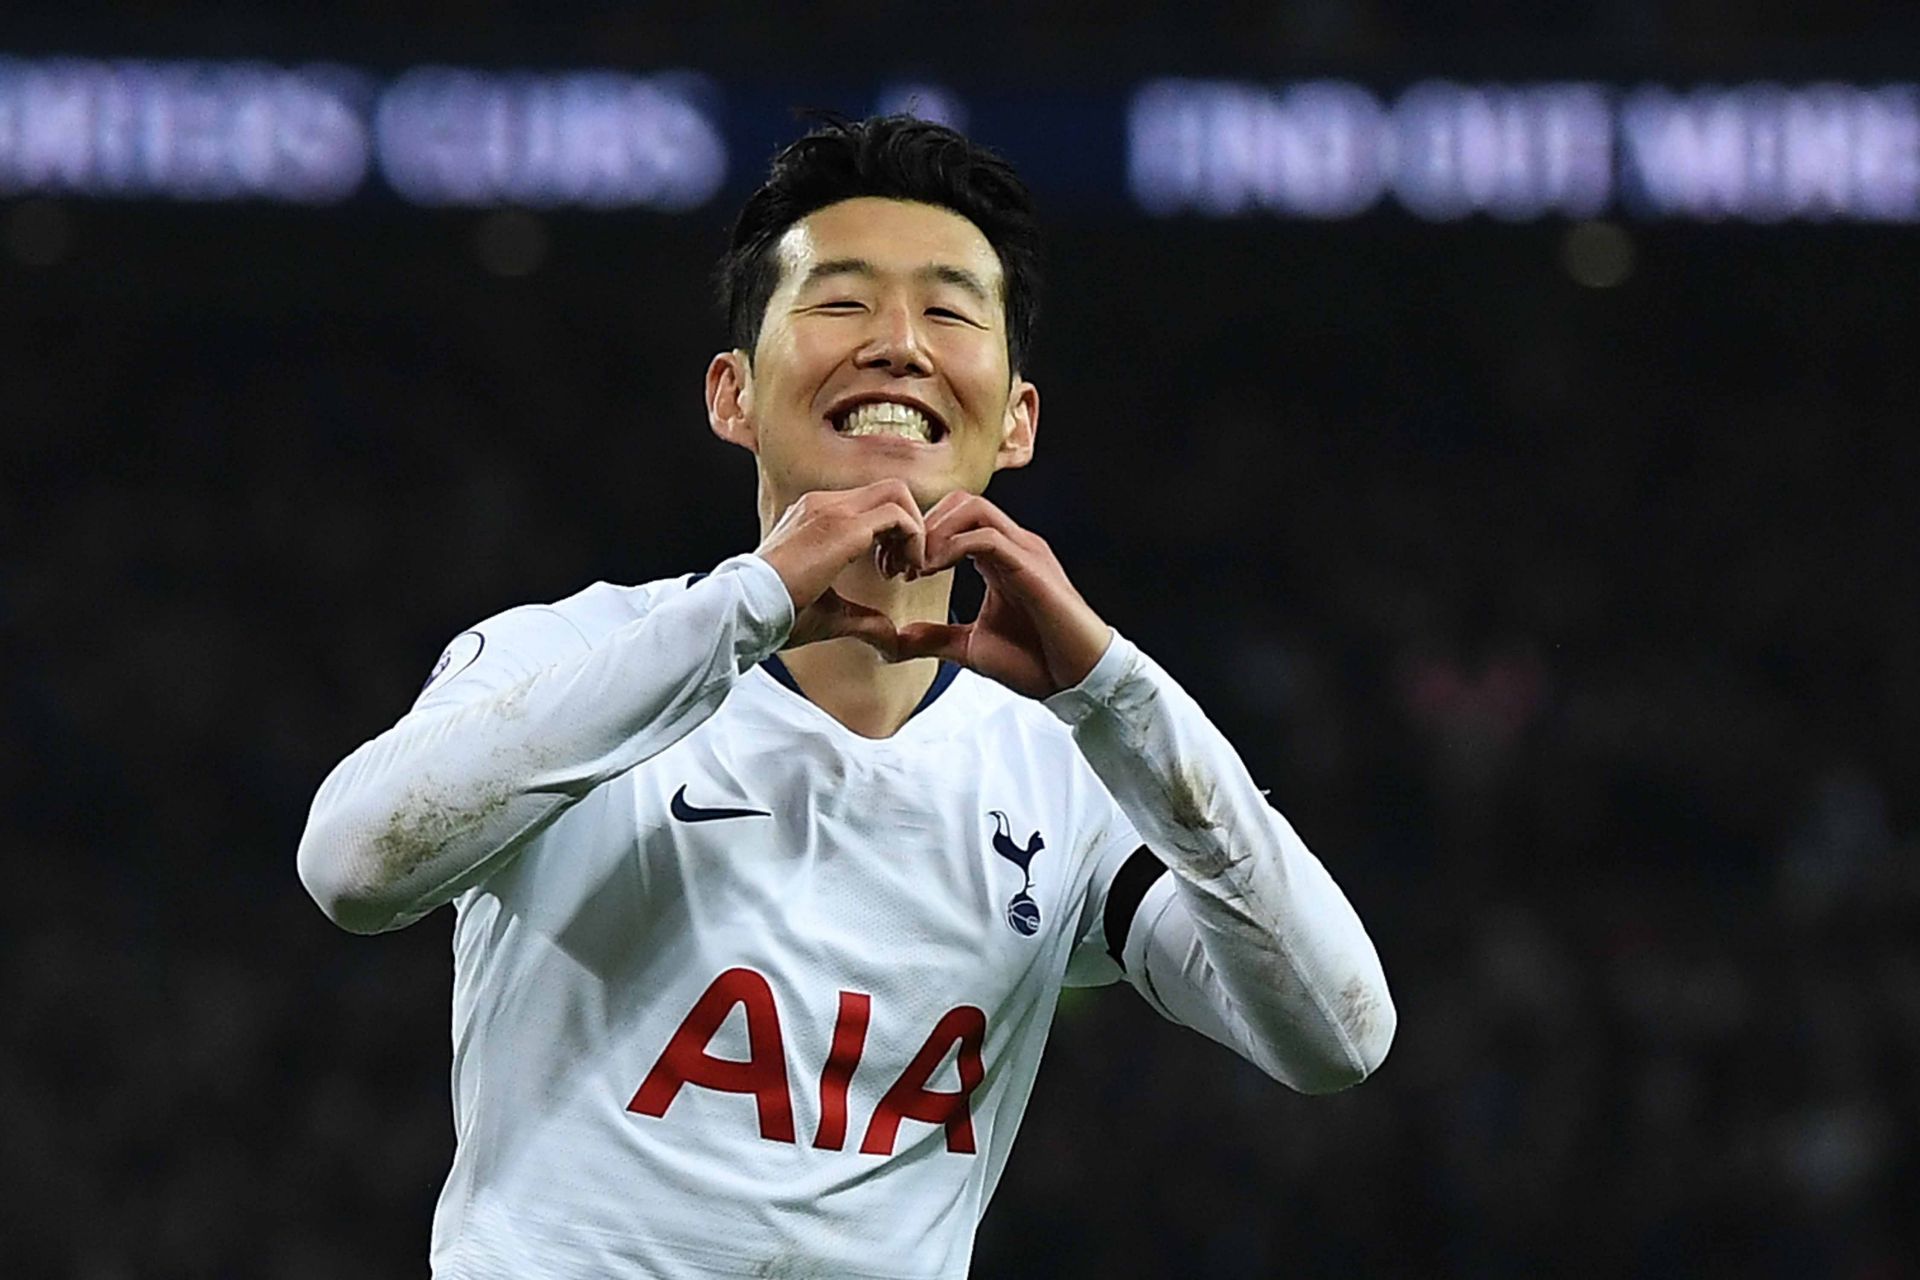 Son Heung-min deserves more appreciation for his contributions